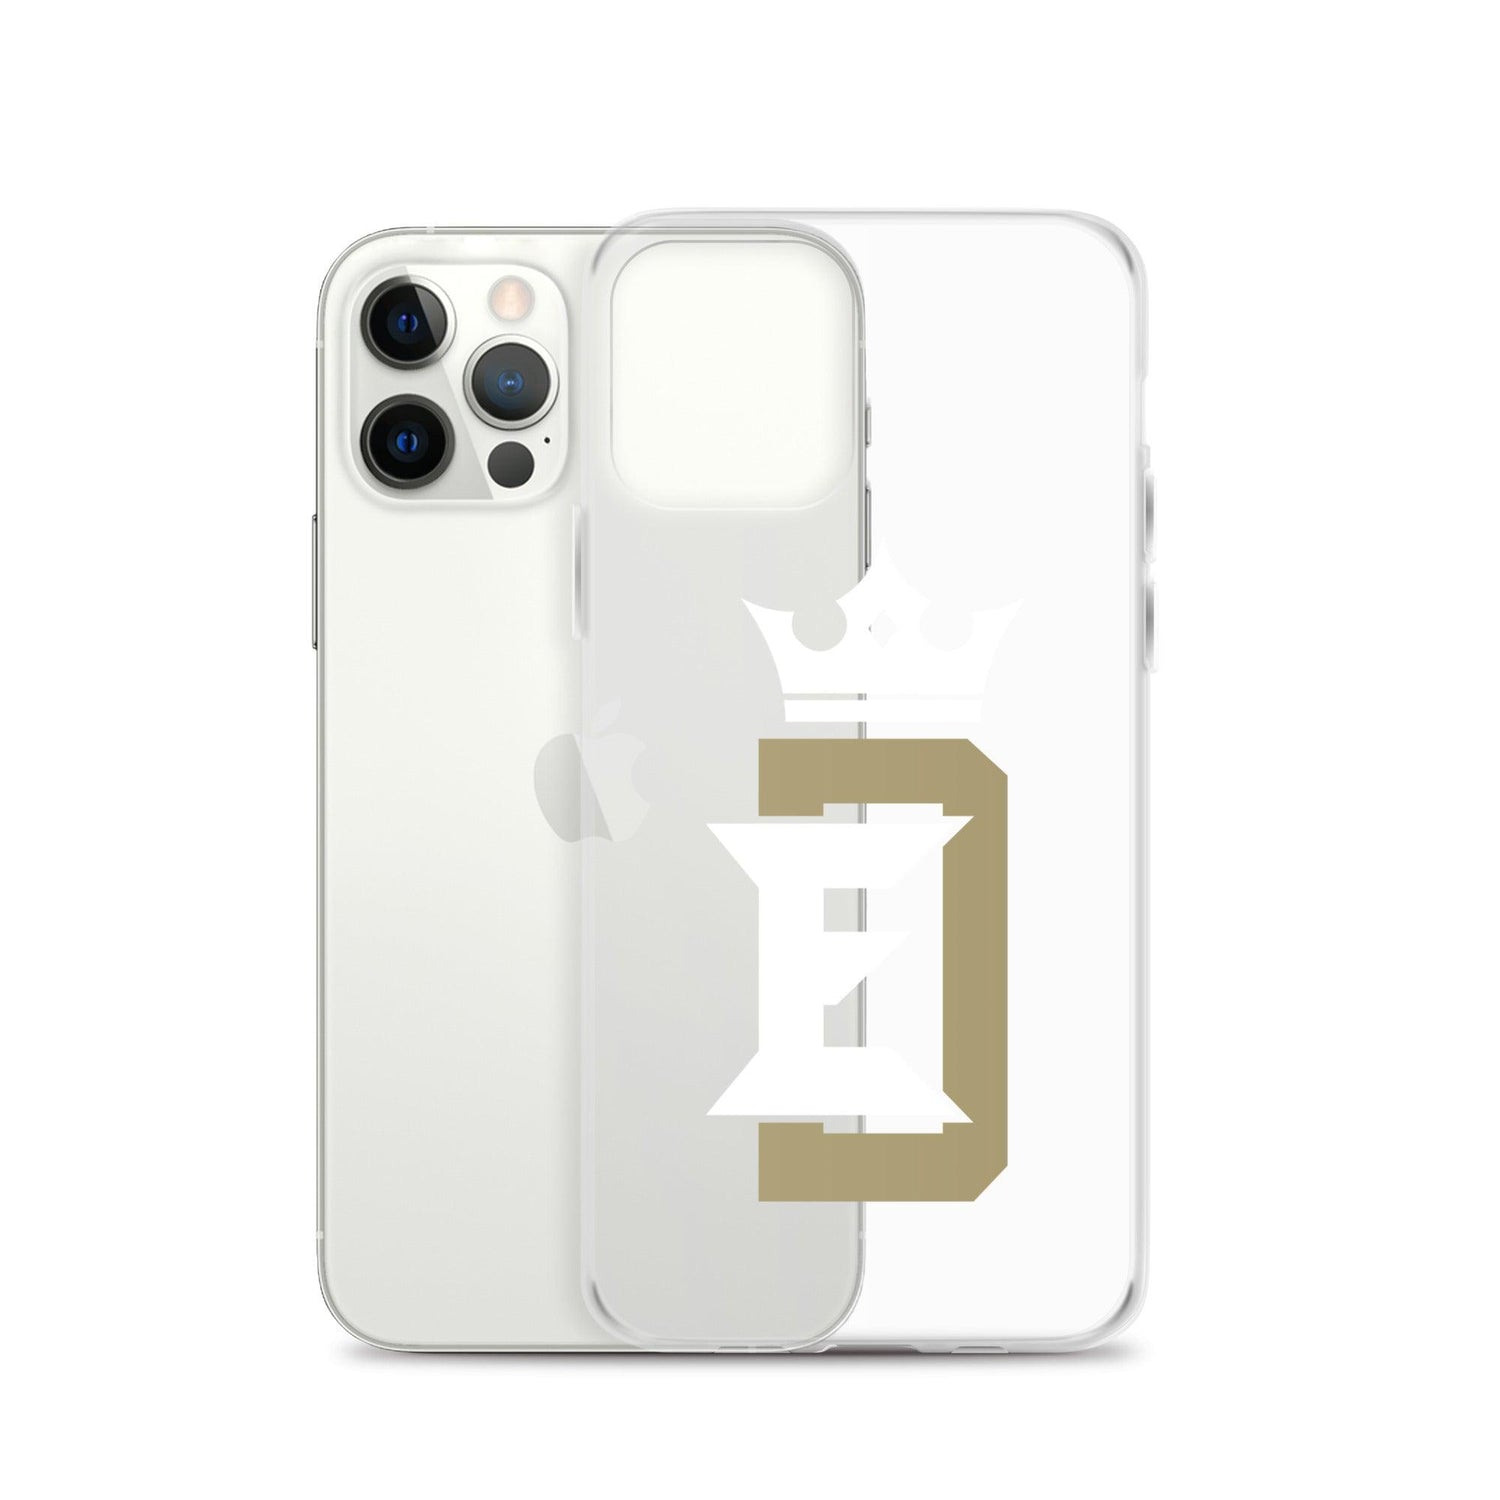 Donye Evans "Royalty" iPhone Case - Fan Arch